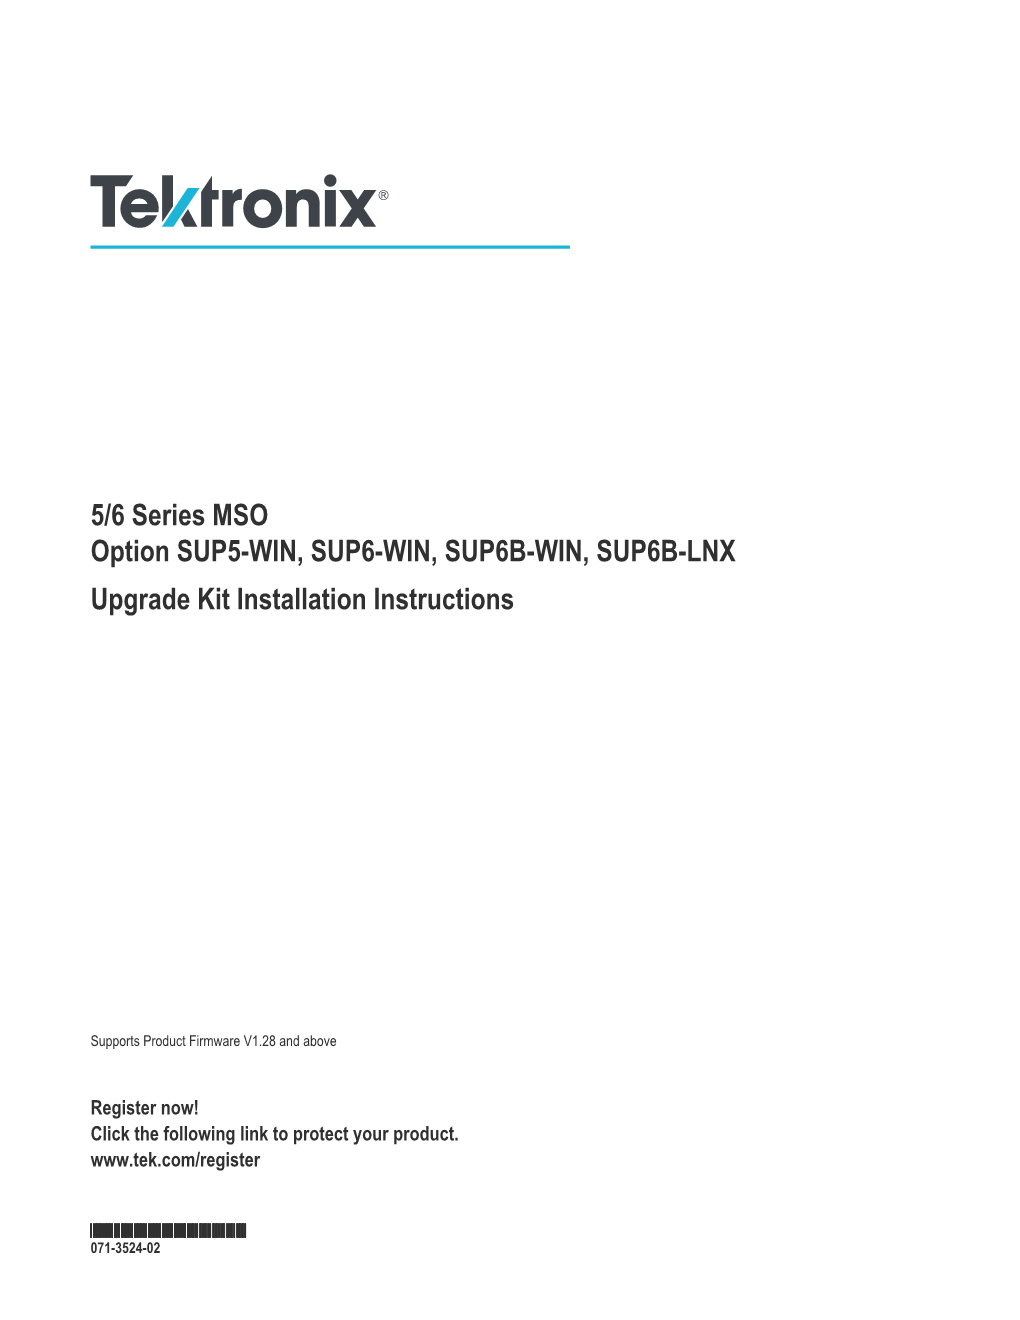 5/6 Series MSO Option SUP5-WIN, SUP6-WIN, SUP6B-WIN, SUP6B-LNX Upgrade Kit Installation Instructions